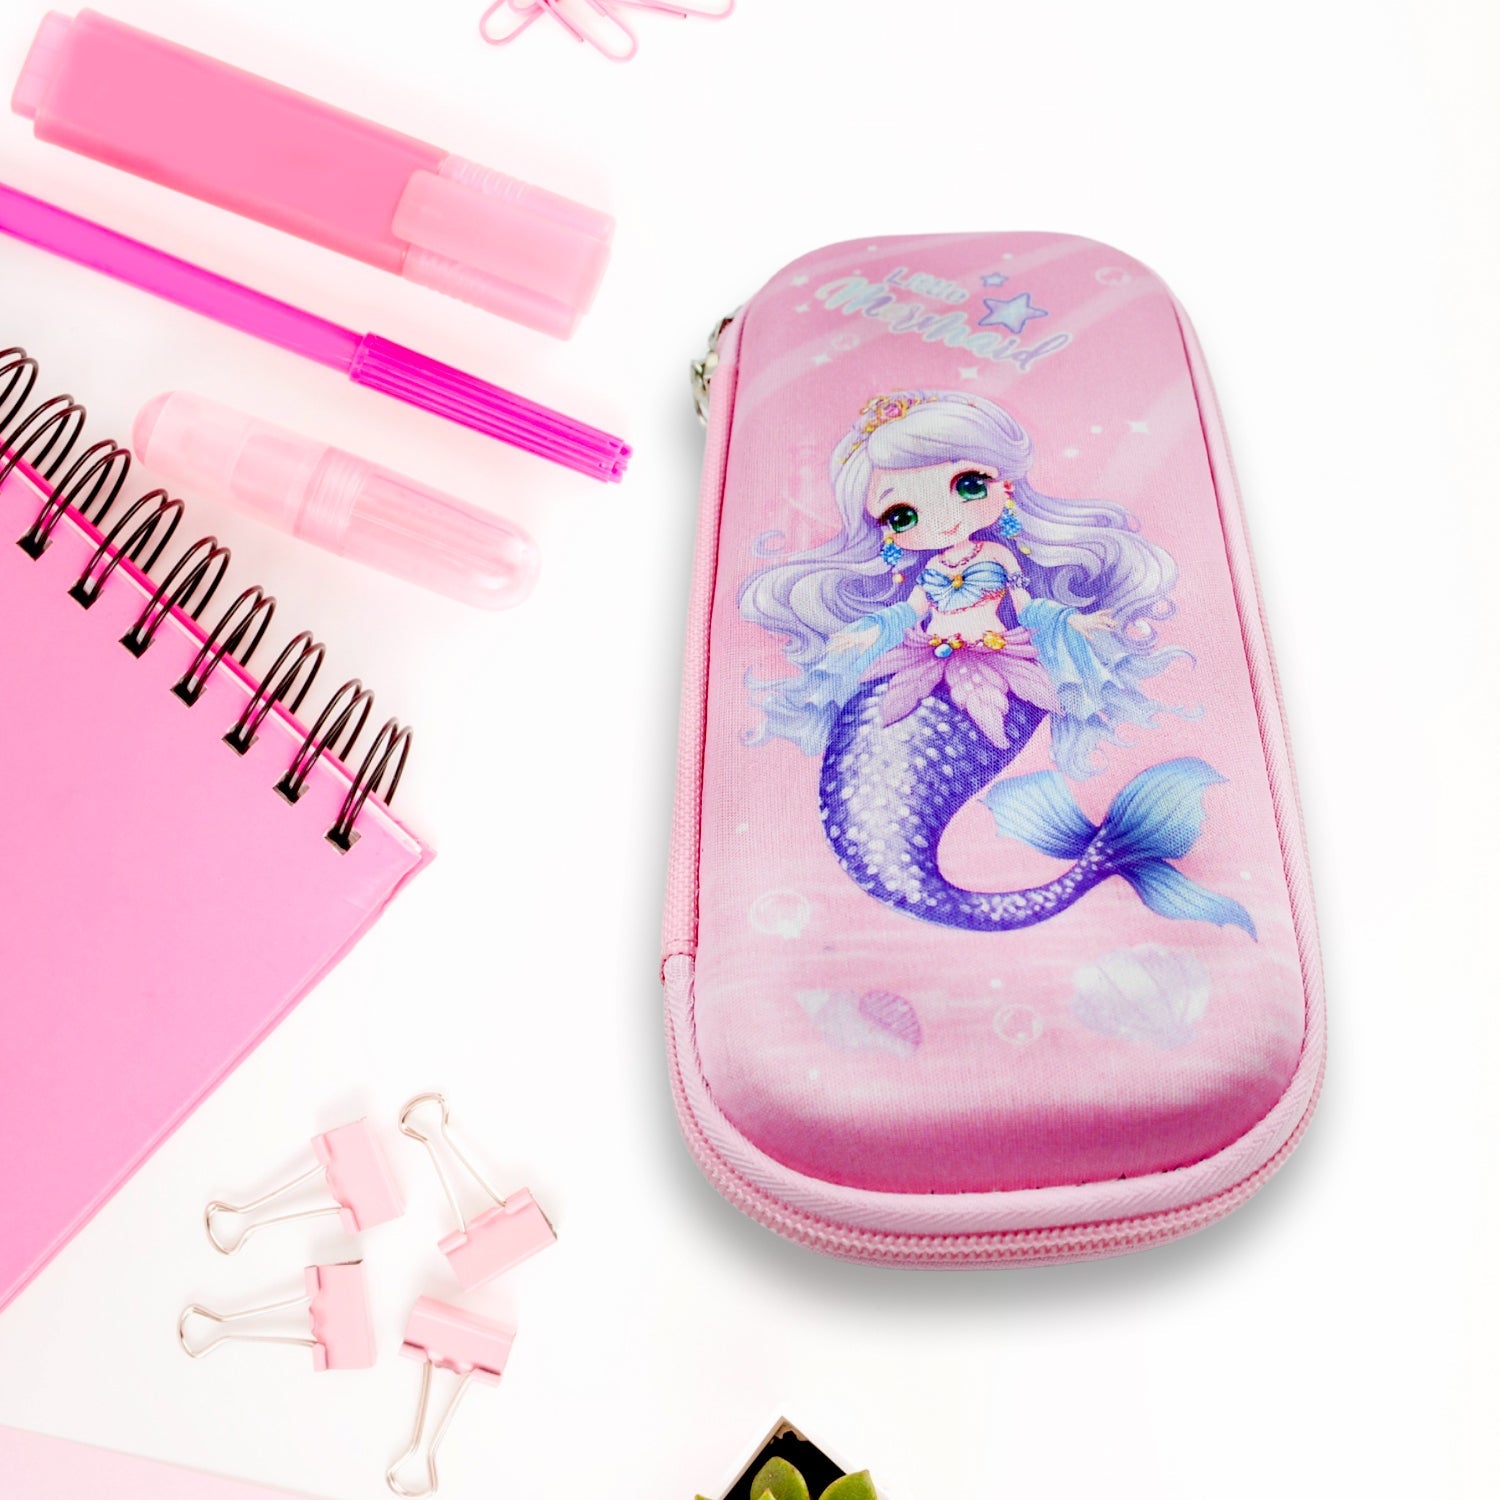 8877 Pencil Case for Girls, Cute Pencil Case for Kids, Storage Pouch Large Capacity with Compartment & Zipper & Unicorn Ornaments, Toddler School Supply Organizer for Students, Stationery Box Pouch (1 Pc / 23x10 Cm)